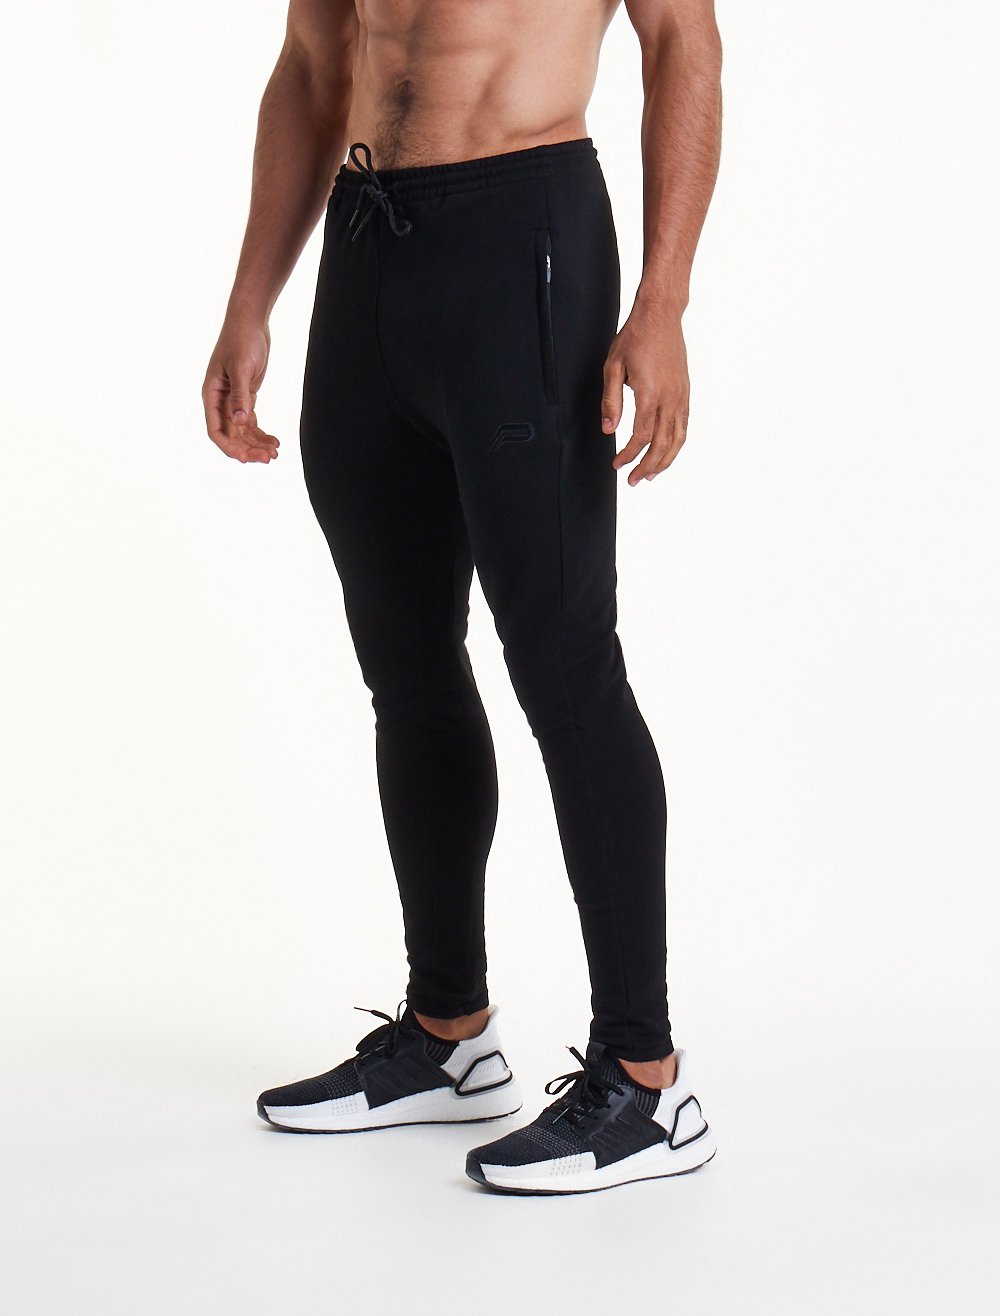 products/mens-pro-fit-tapered-bottoms-triple-black.jpg